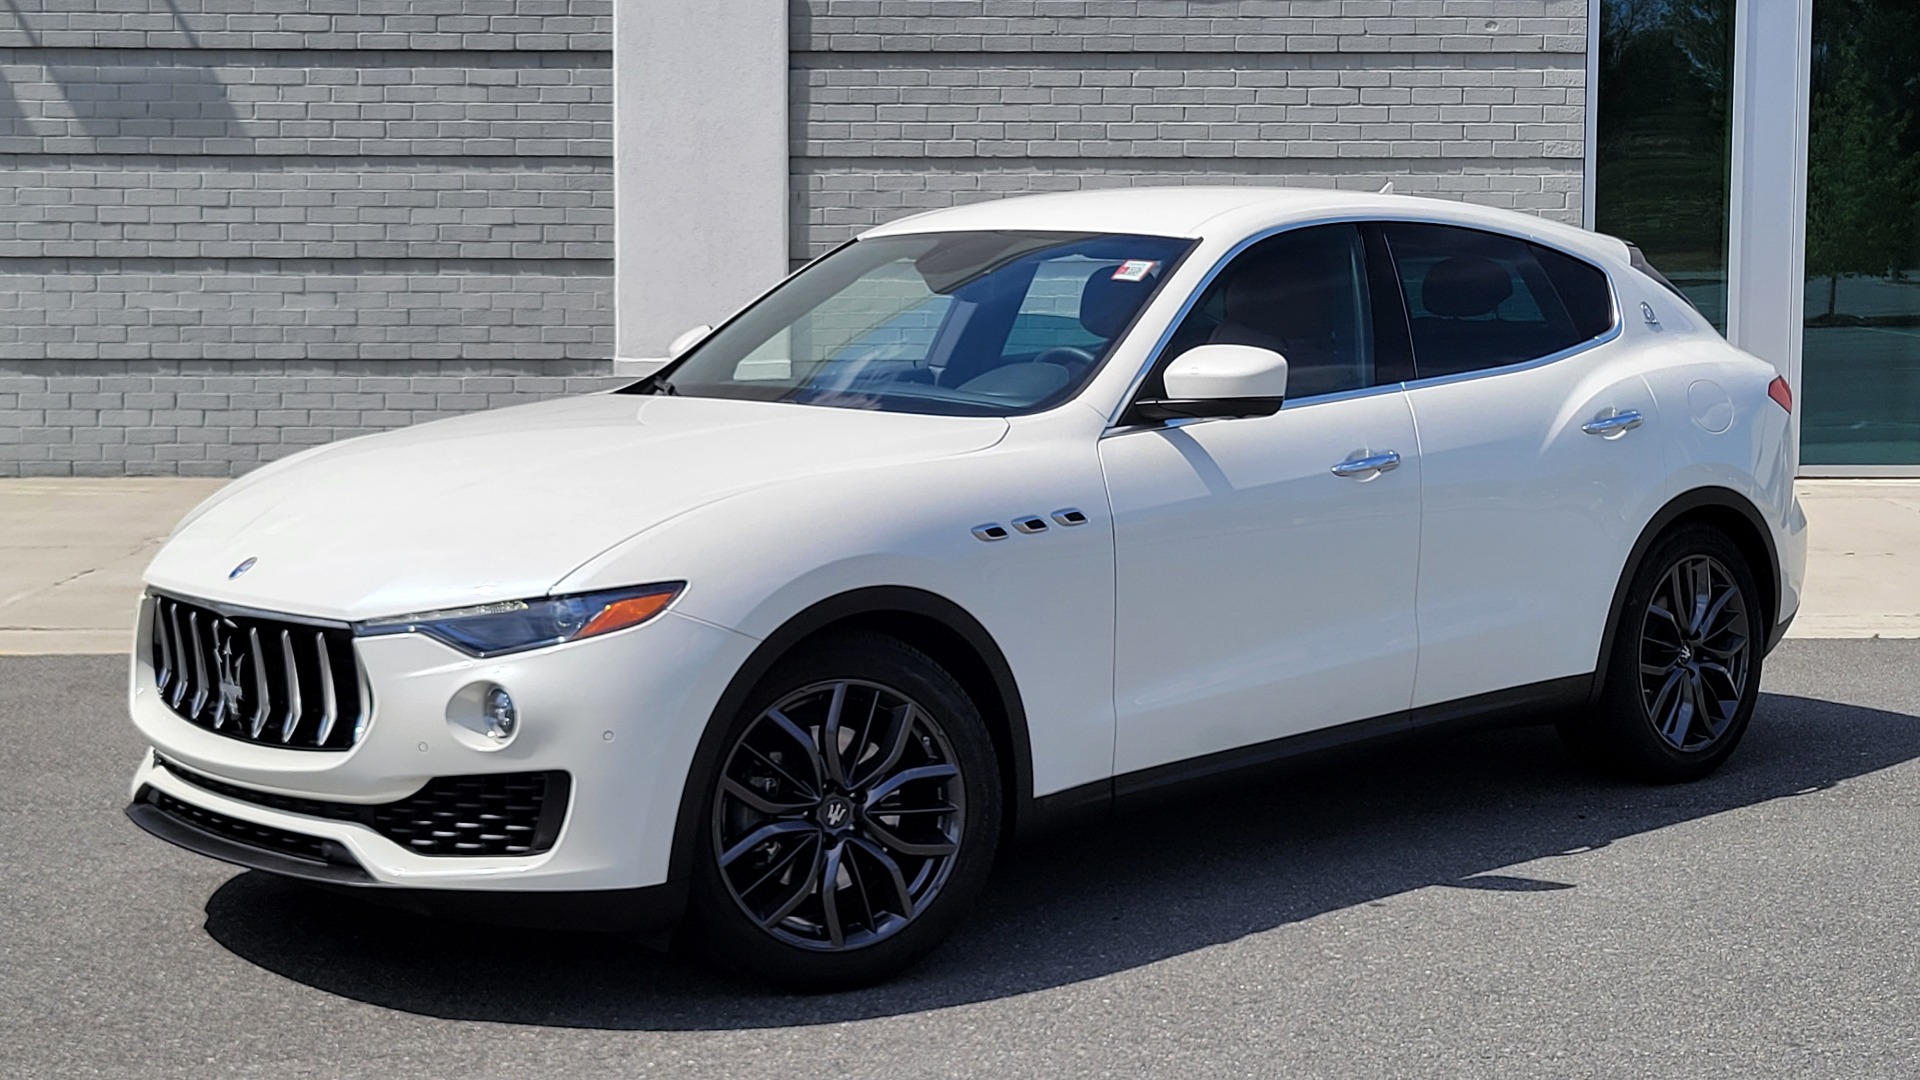 Used 2018 Maserati LEVANTE 3.0L 345HP SUV / 8-SPD / PREMIUM / BSA / NAV / 20IN WHLS / REARVIEW for sale $50,495 at Formula Imports in Charlotte NC 28227 10